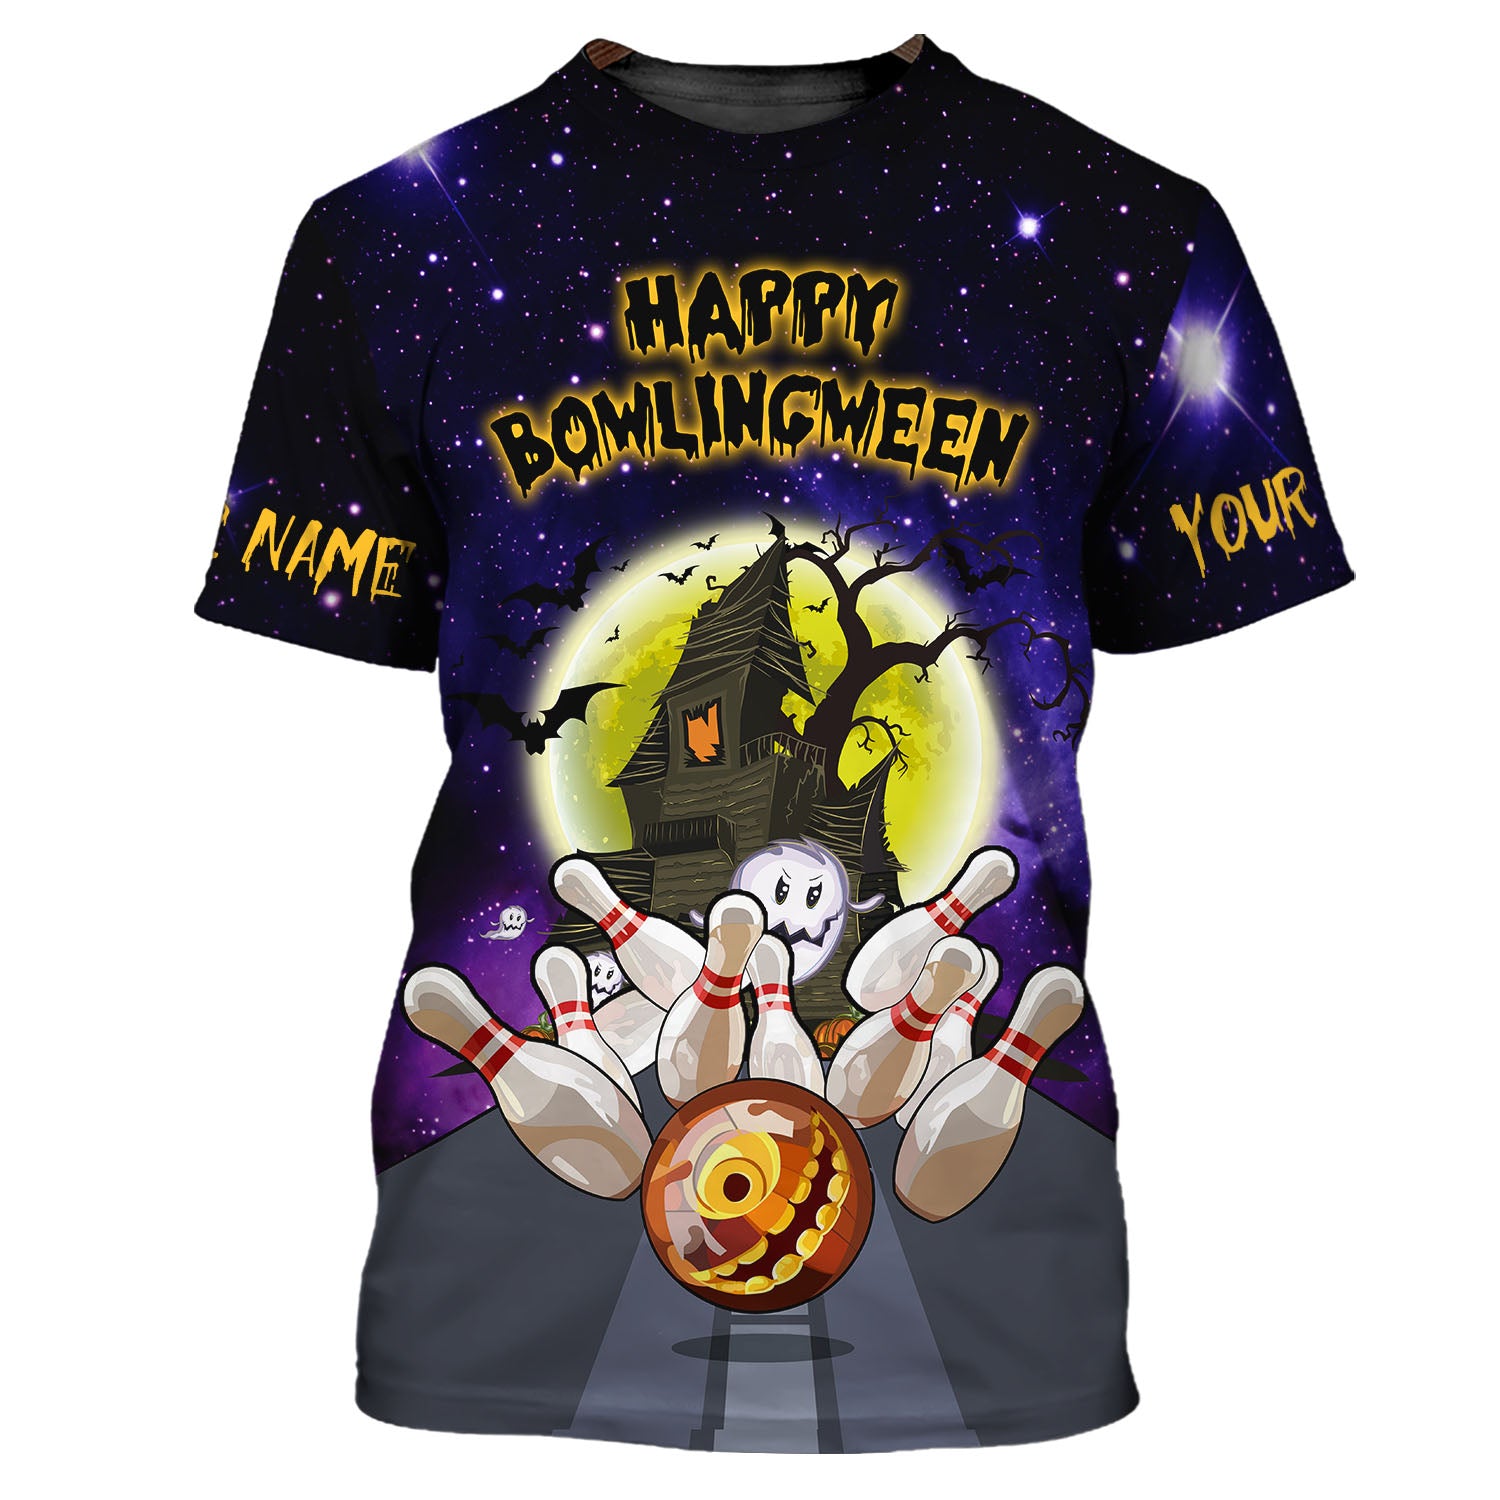 Happy Bowlingween - Custom Name - Personalized Halloween 3D Shirt, Halloween Gift, Bowling Lover